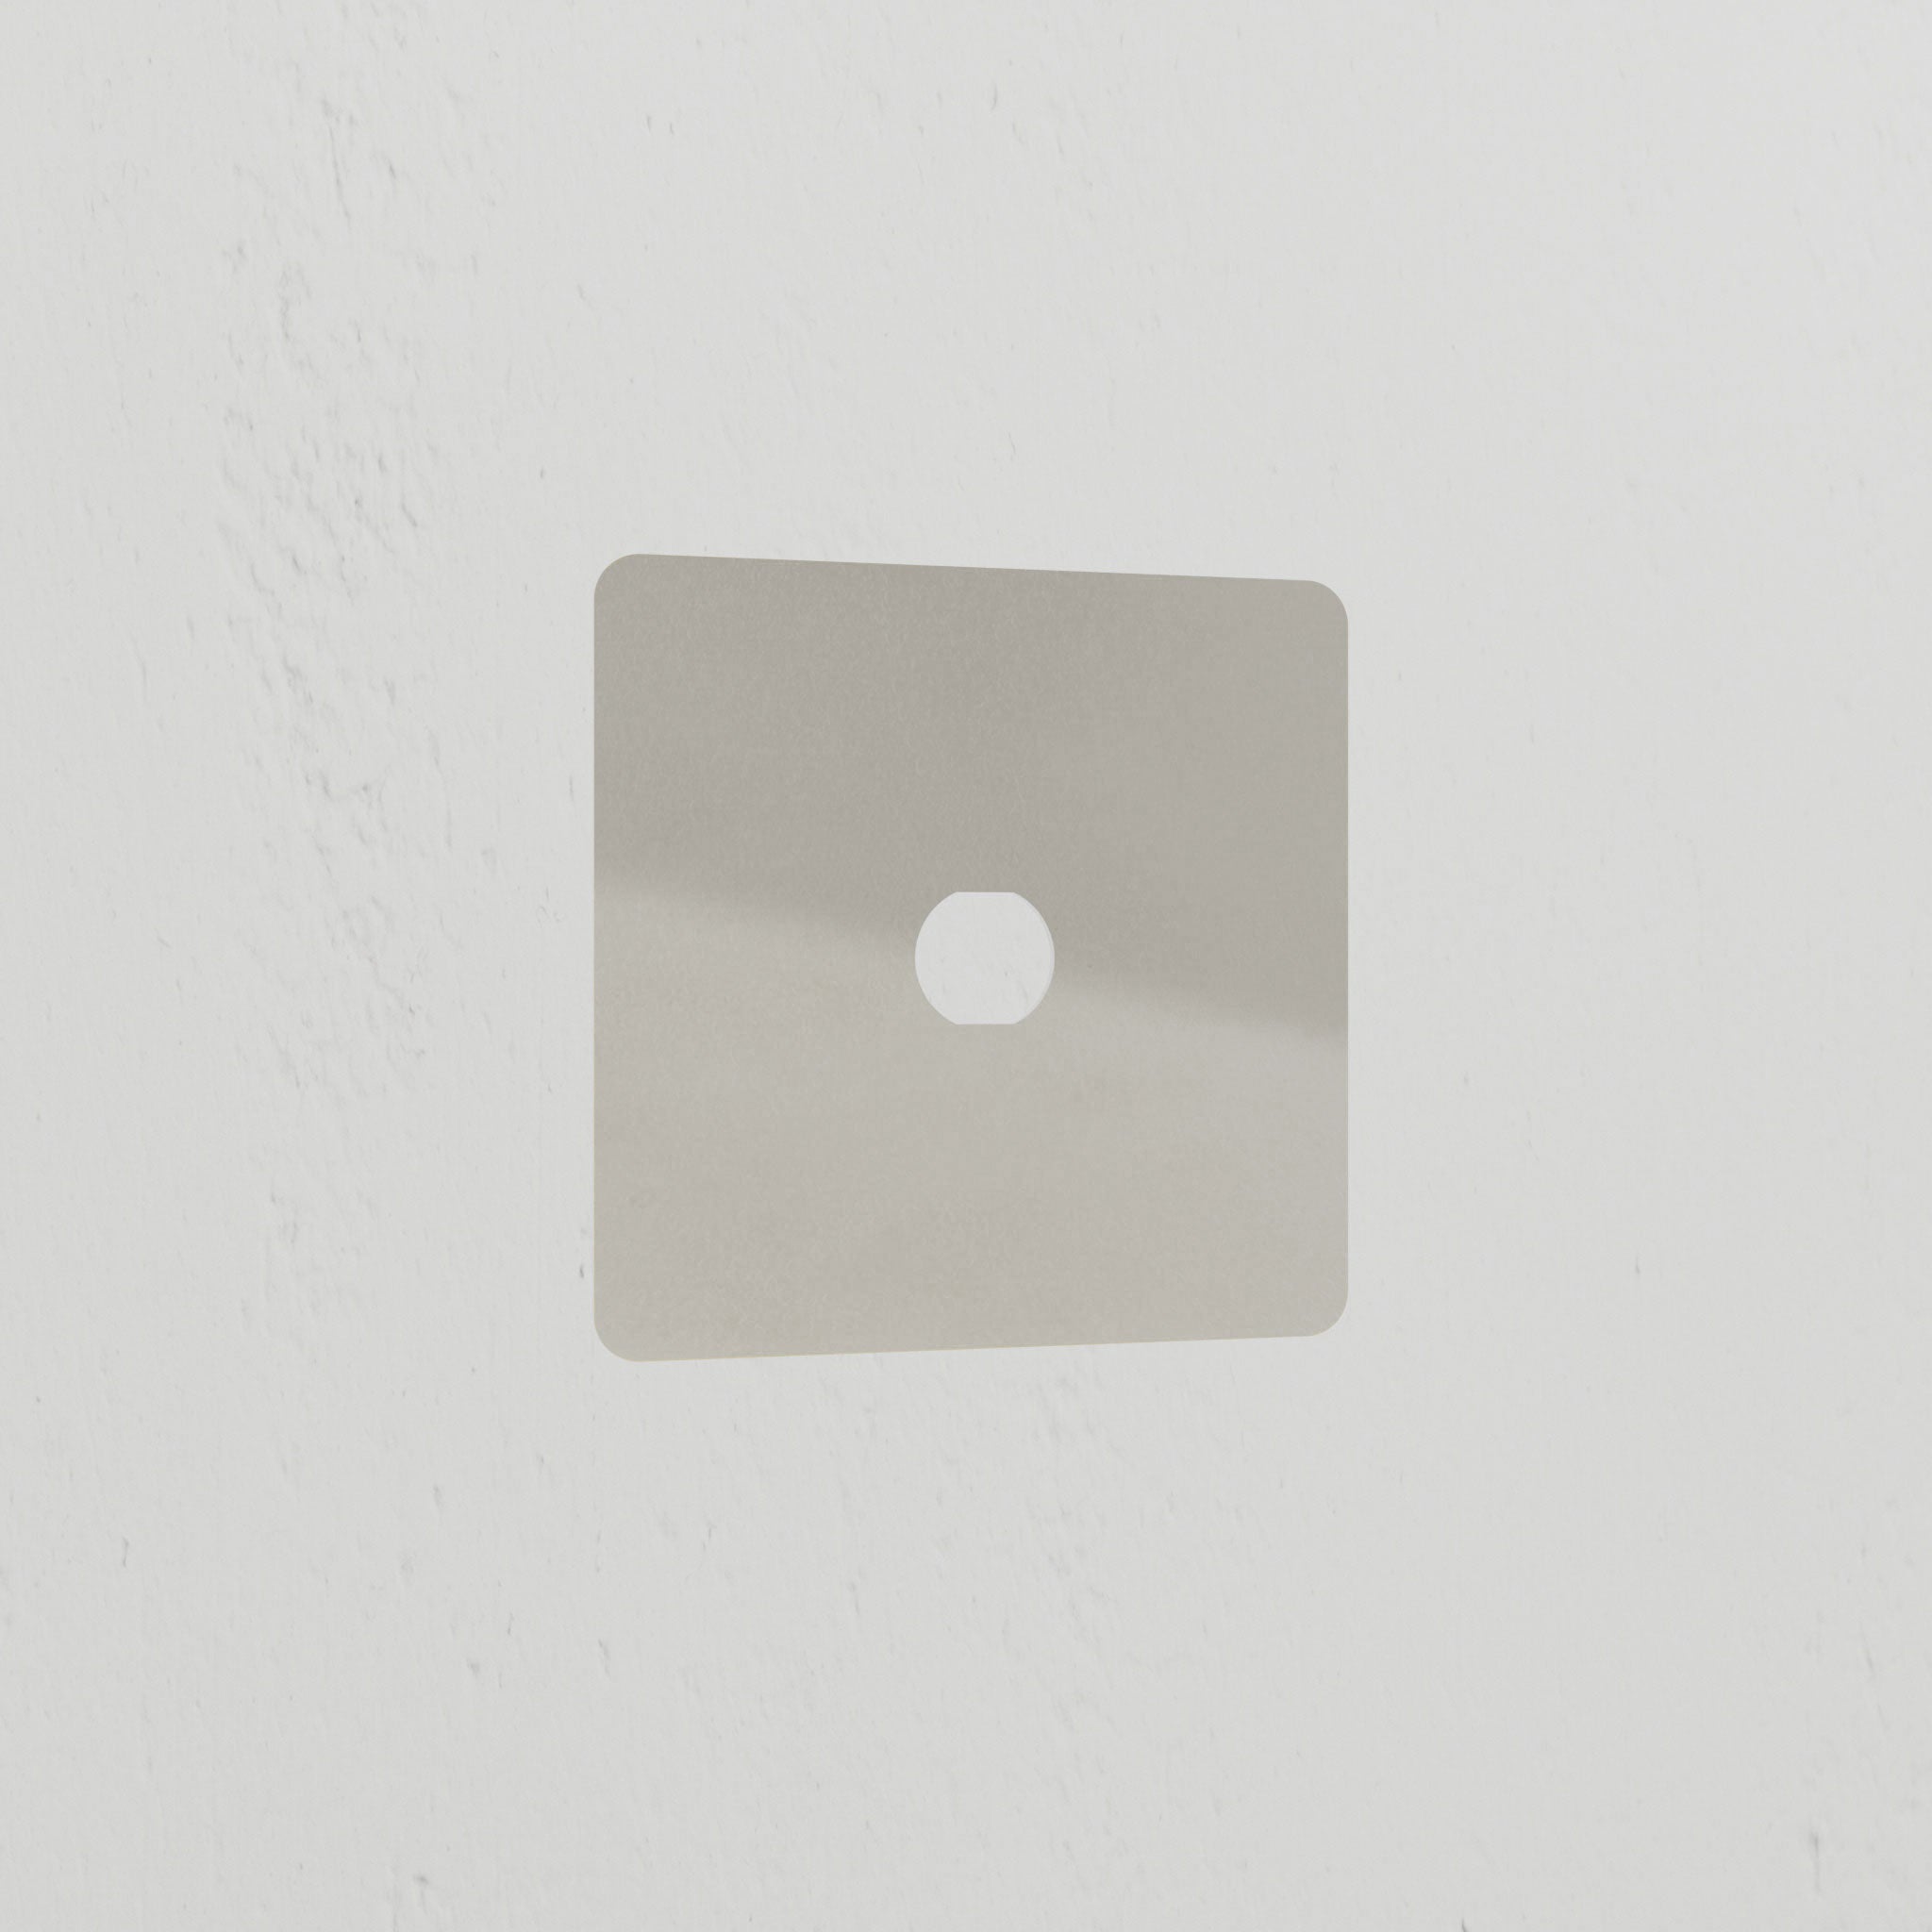 1G Switch Plate - Polished Nickel